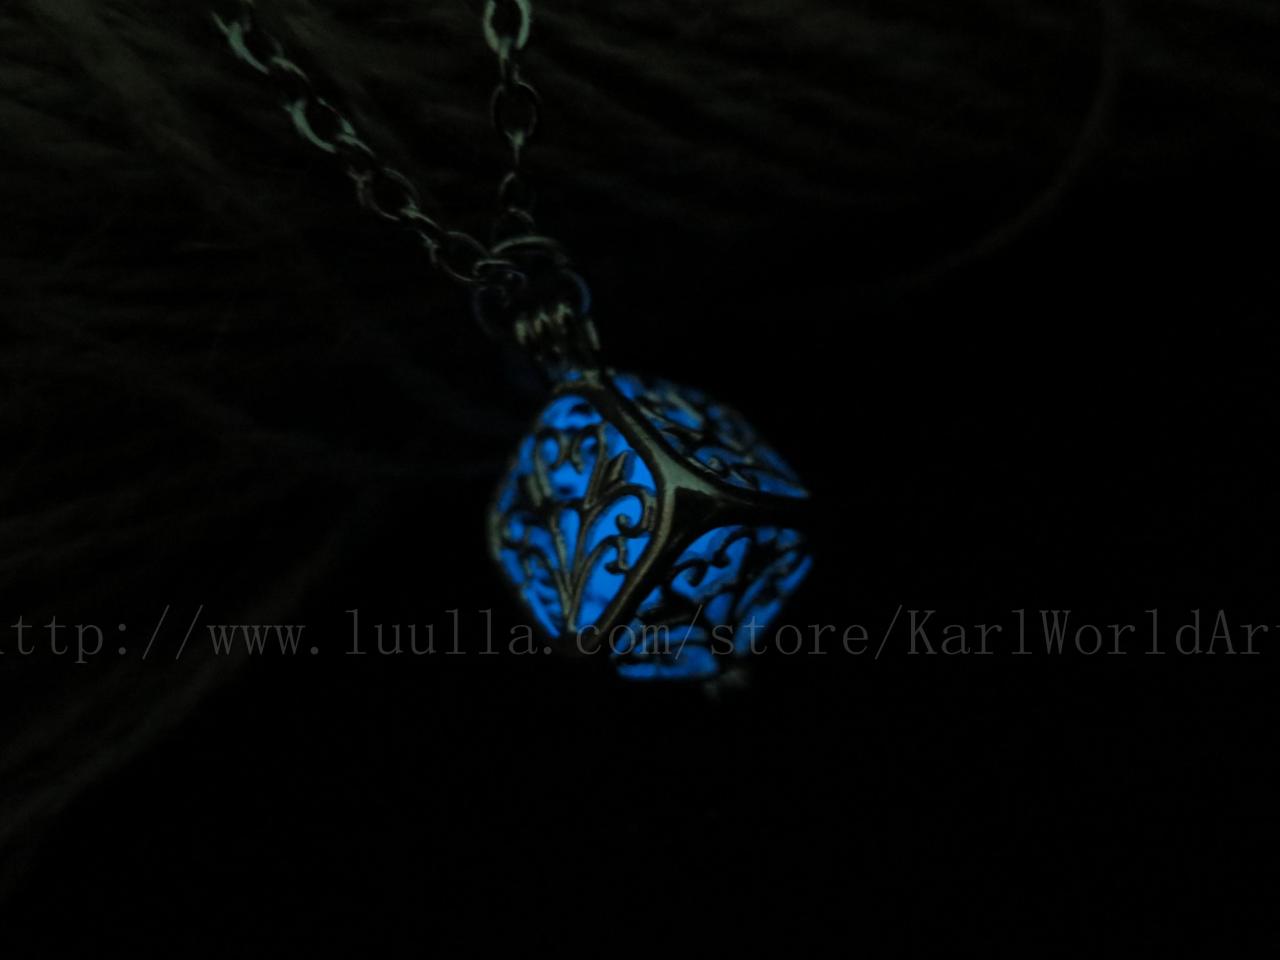 Free shipping Blue Cube Glowing Necklace, Glow in the dark necklace,glow pendant necklace,Halloween jewelry